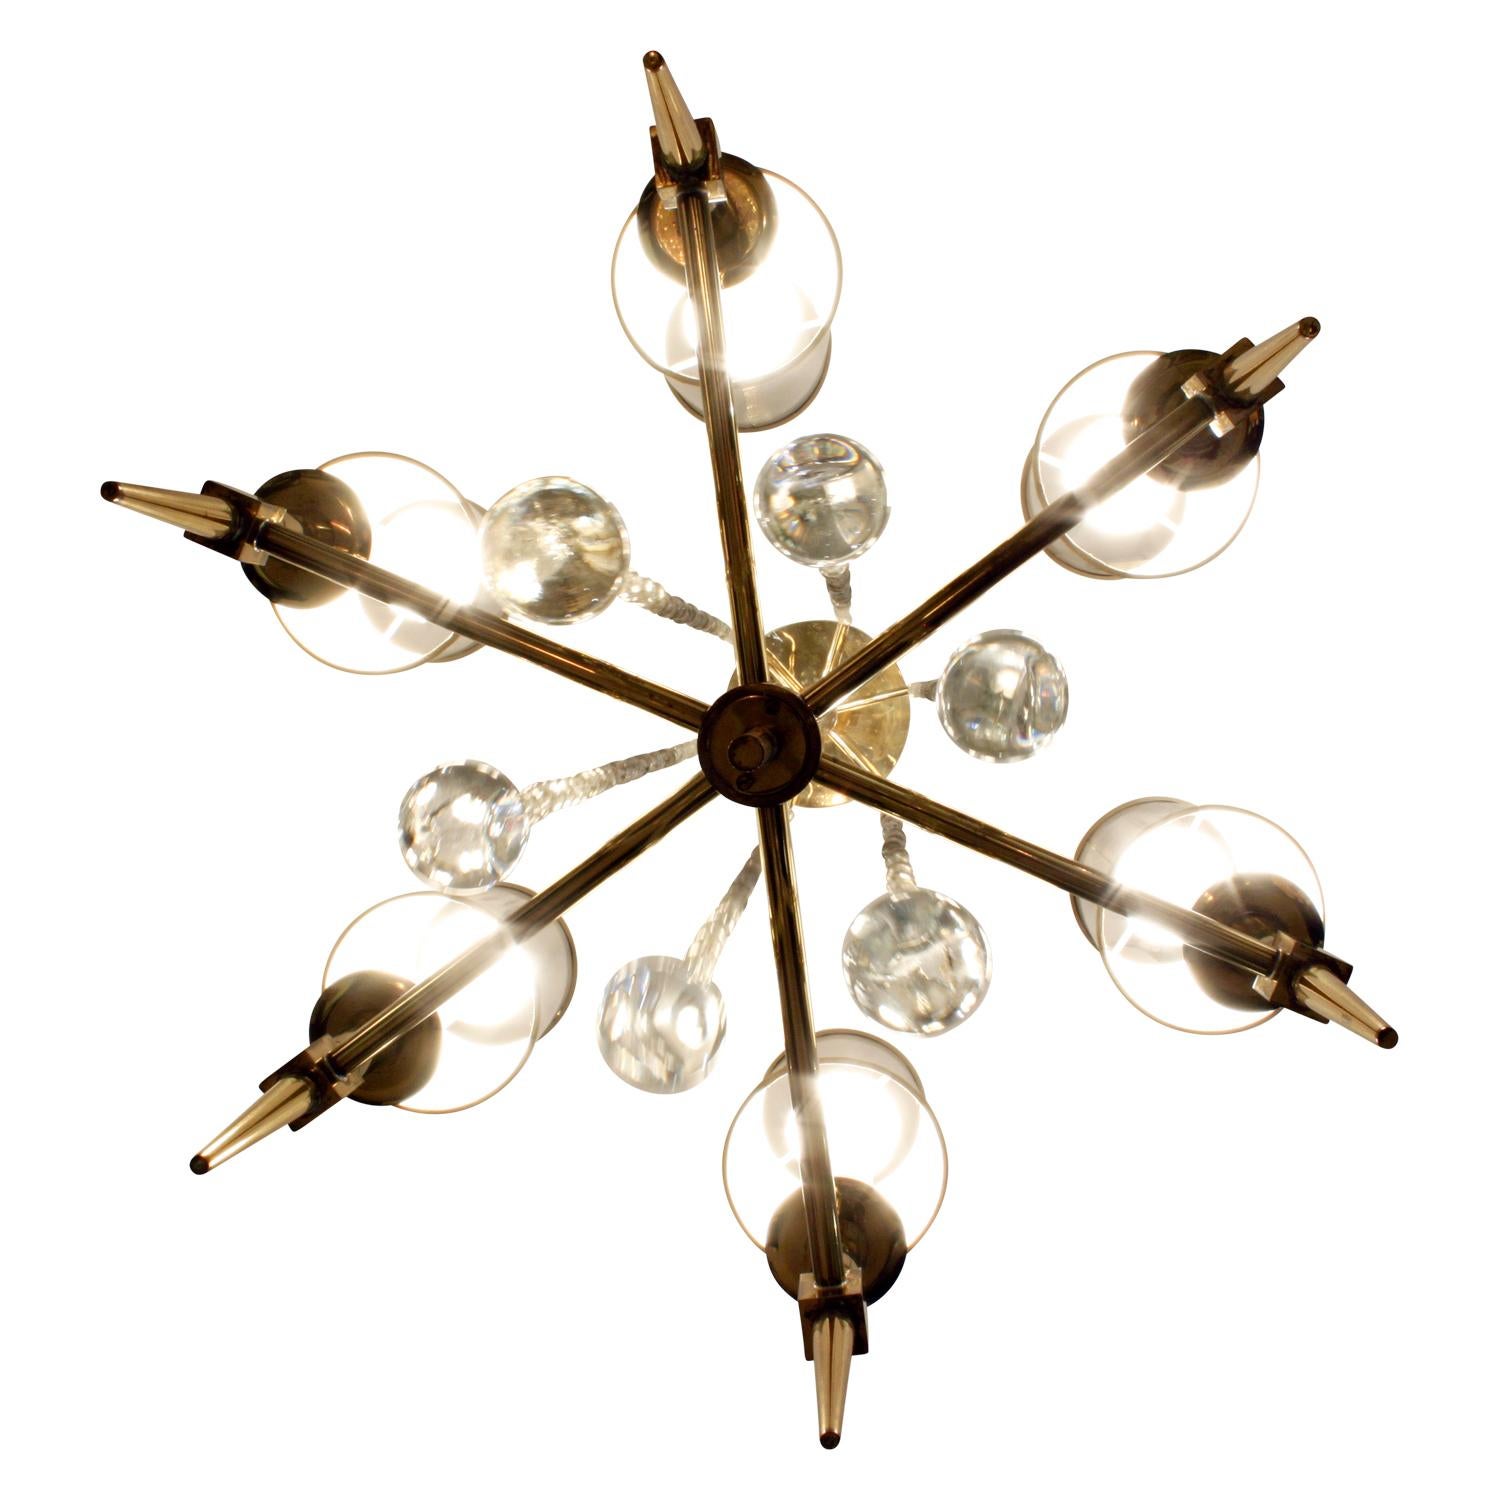 Hand-Crafted Tommi Parzinger Elegant 6-Arm Chandelier with Crystal Balls, 1950s